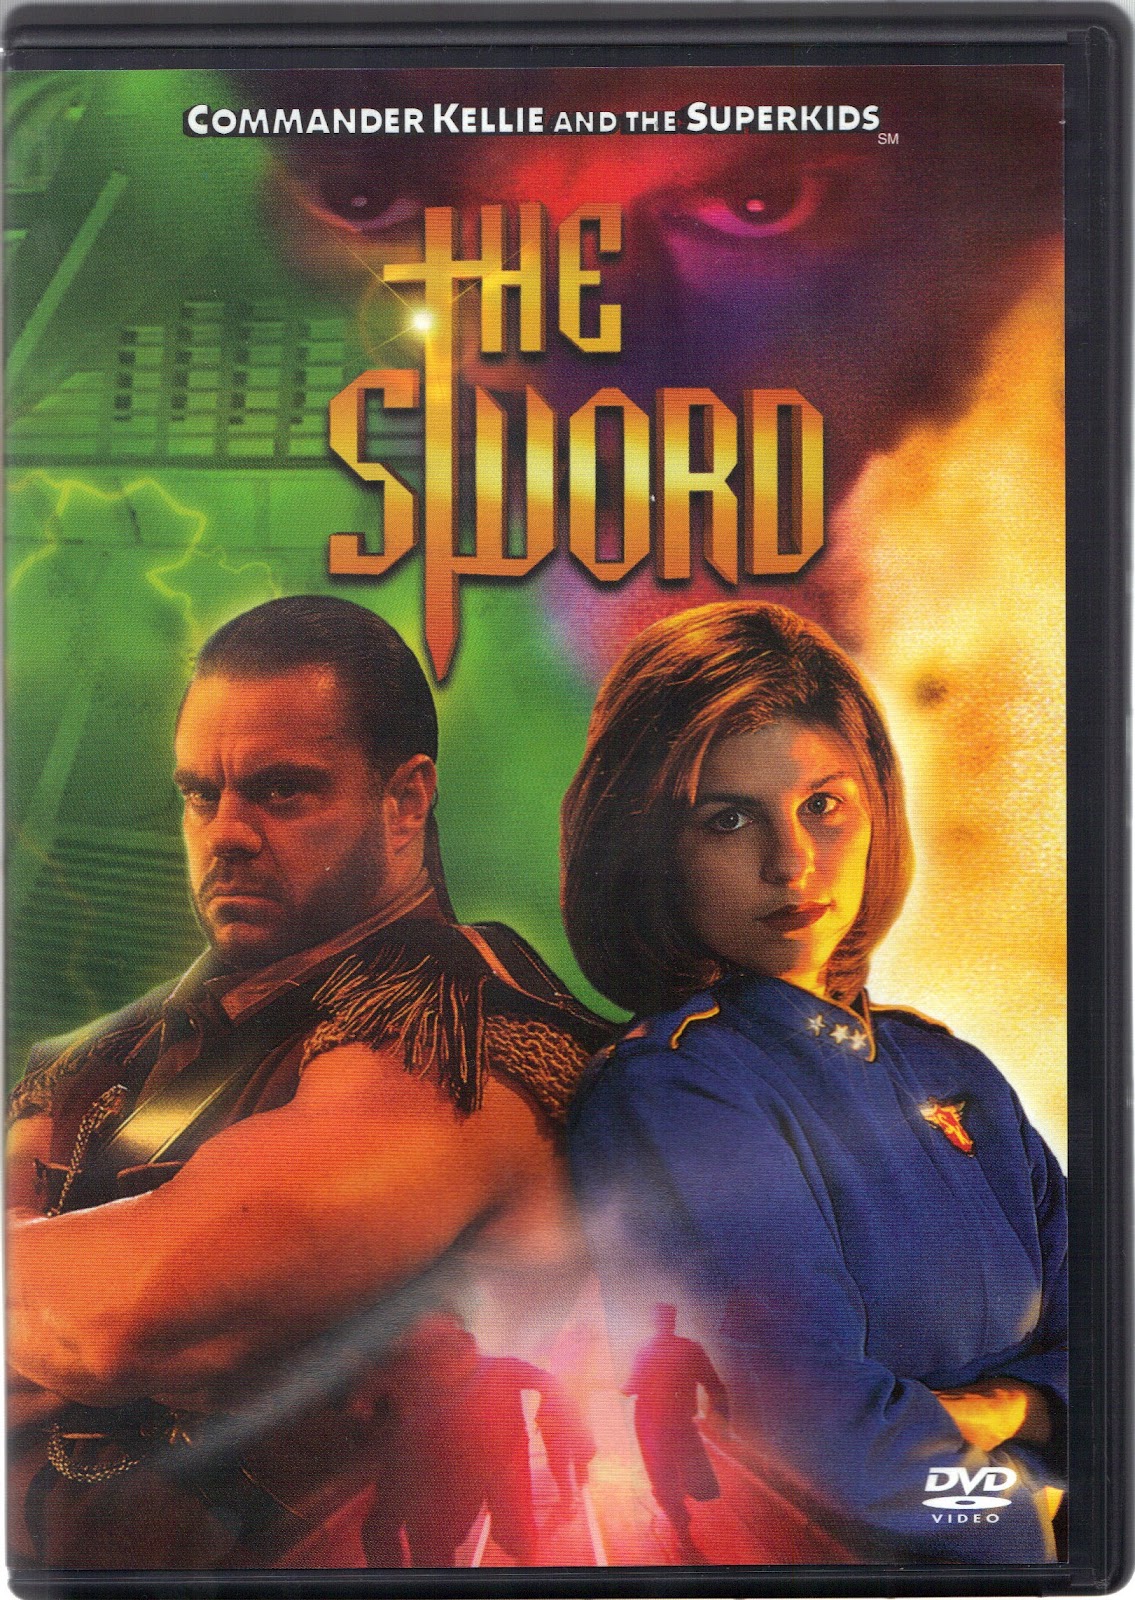 Commander Kellie and the Superkids: The Sword (1997) Screenshot 1 